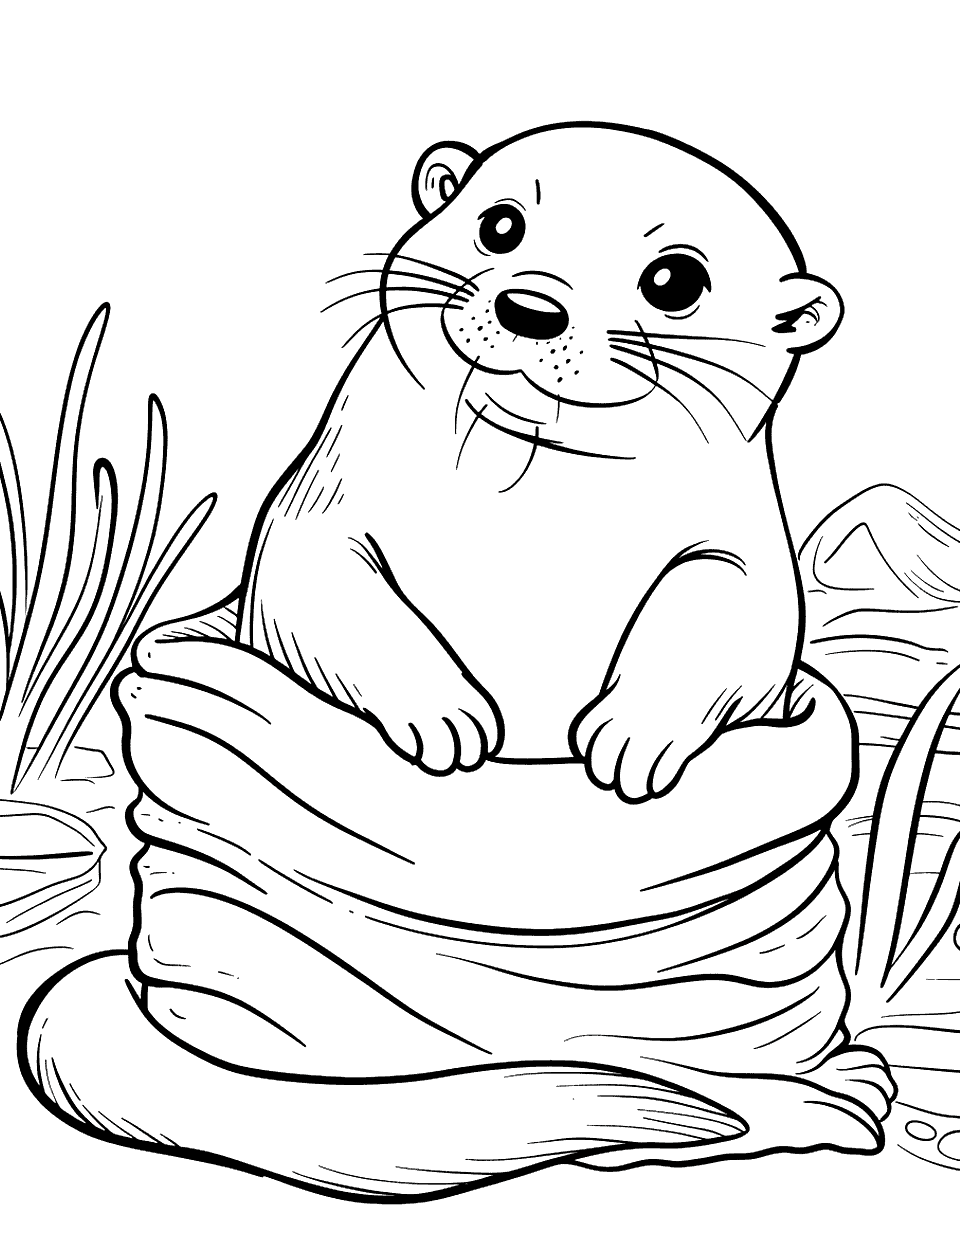 Baby Otter Cuddling Coloring Page - A baby otter wrapped in a soft blanket, looking cozy and warm.